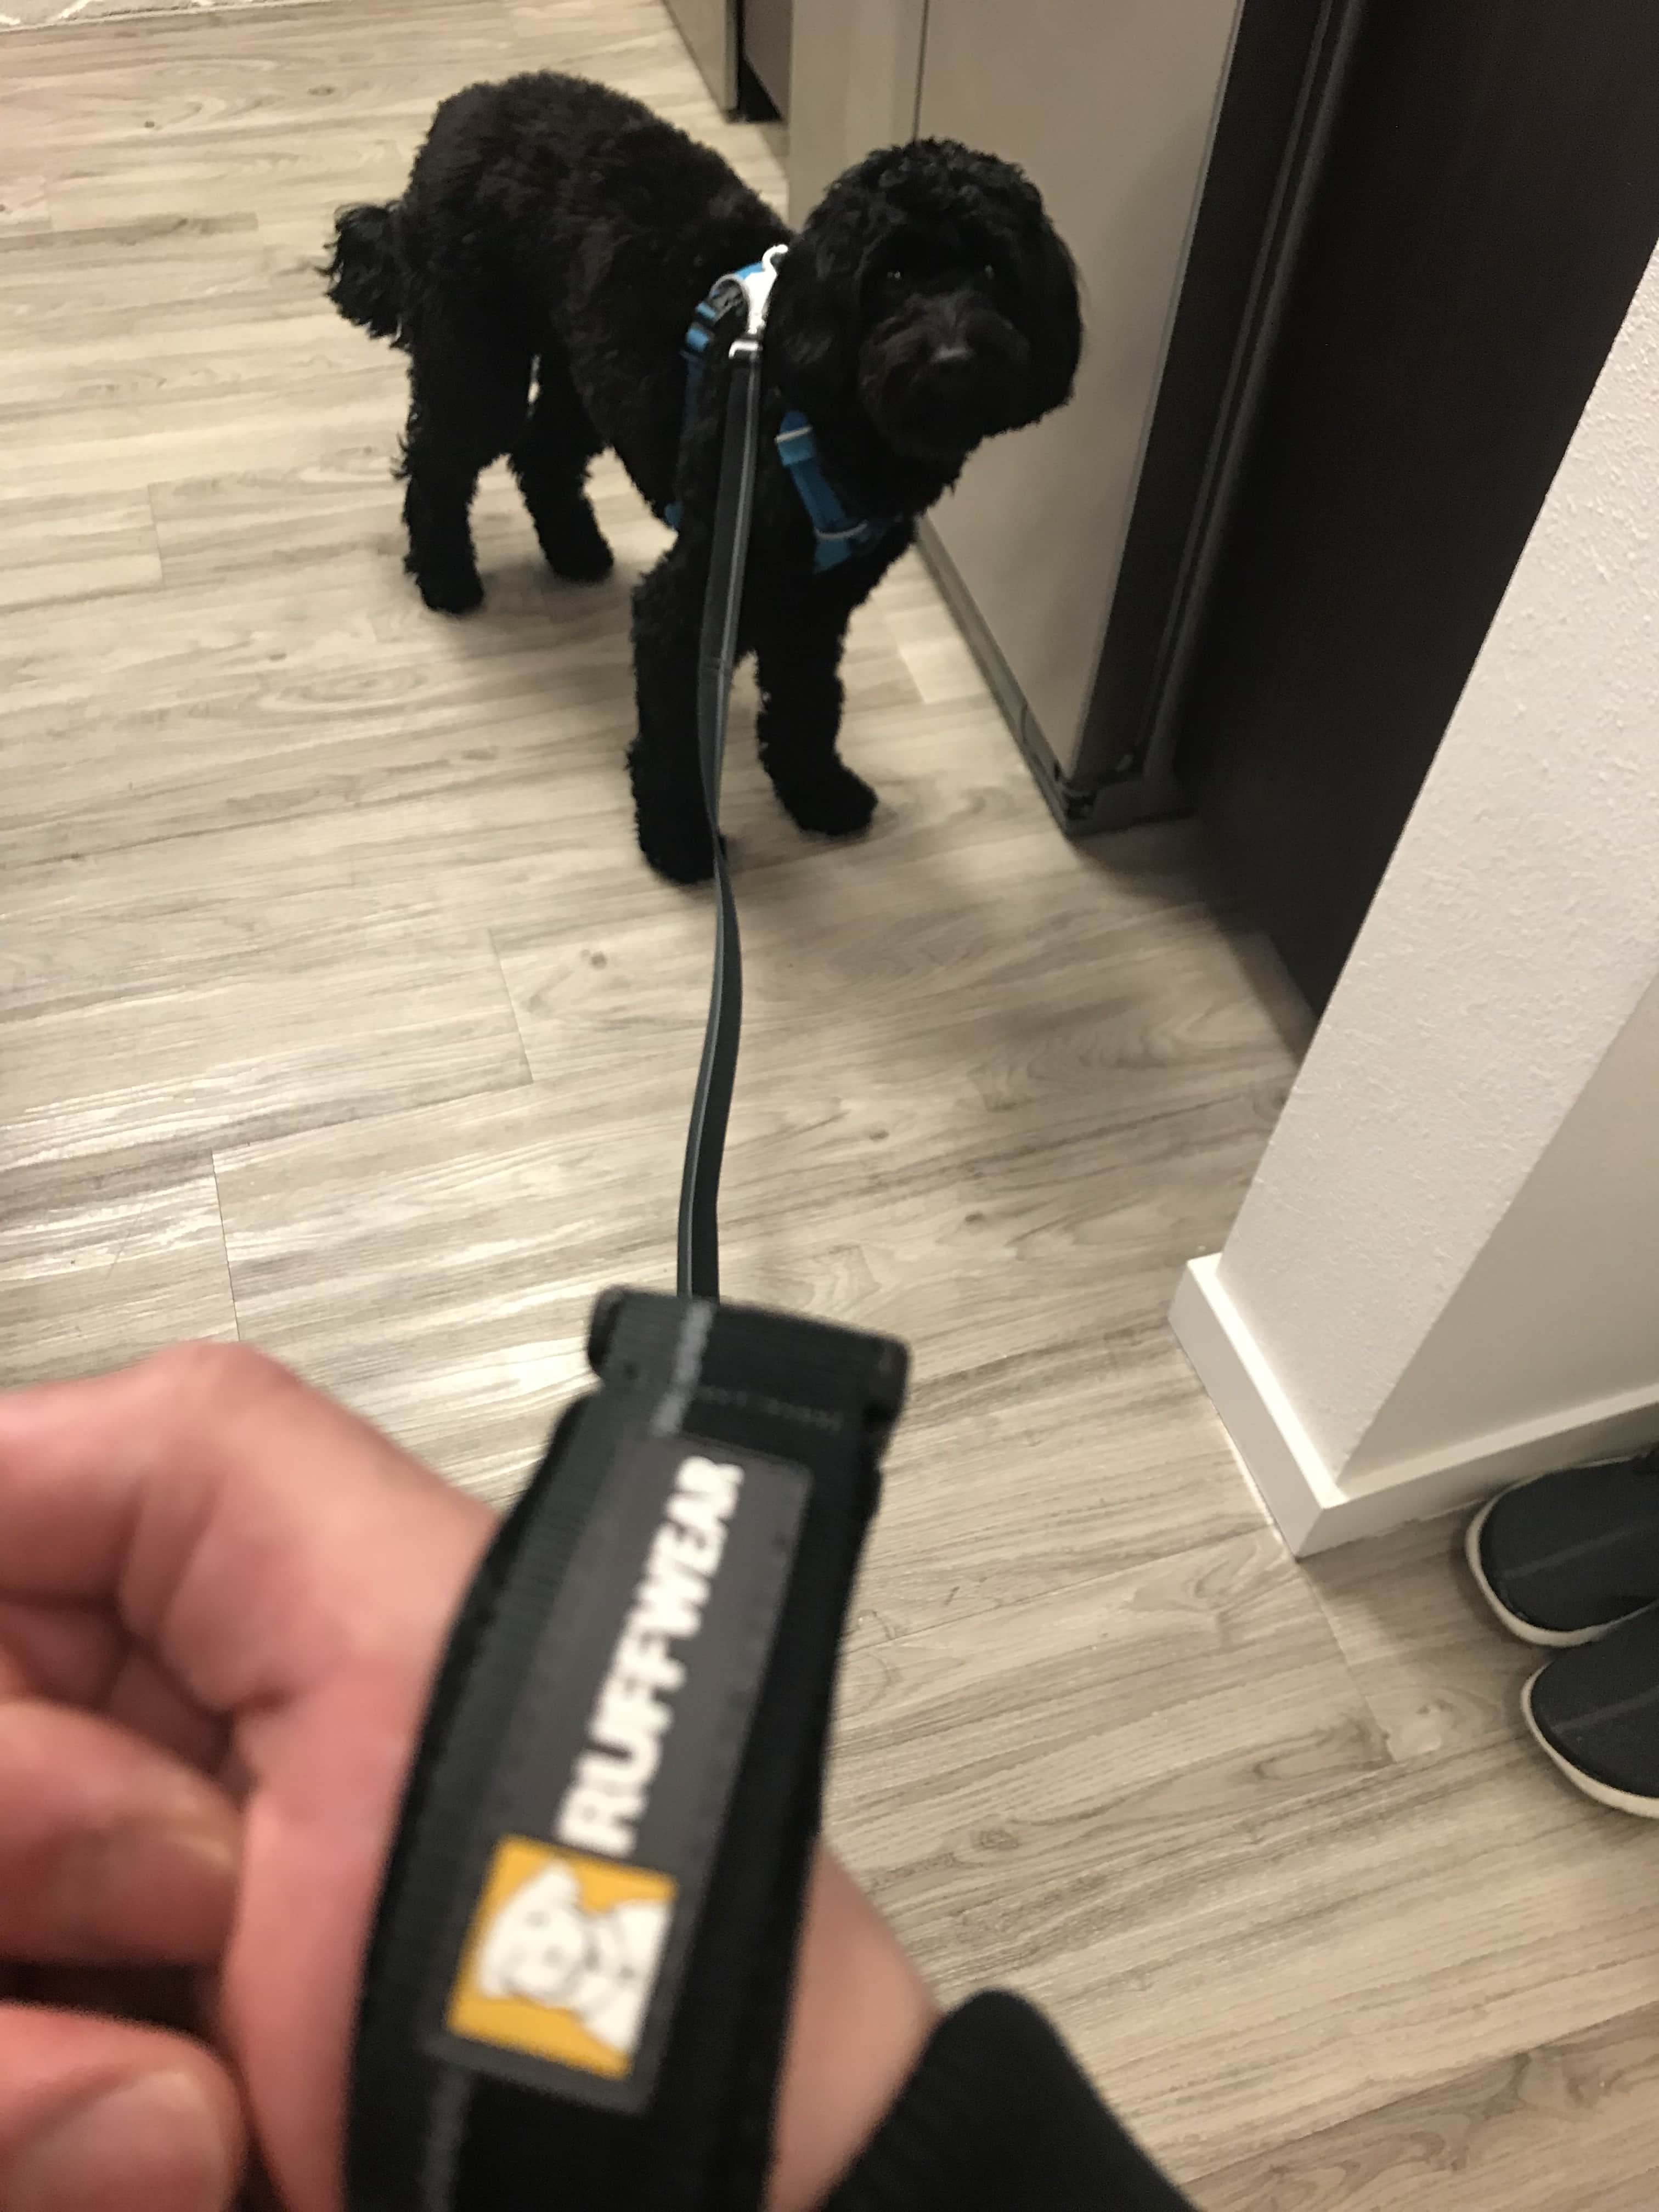 best leash for chewing dogs